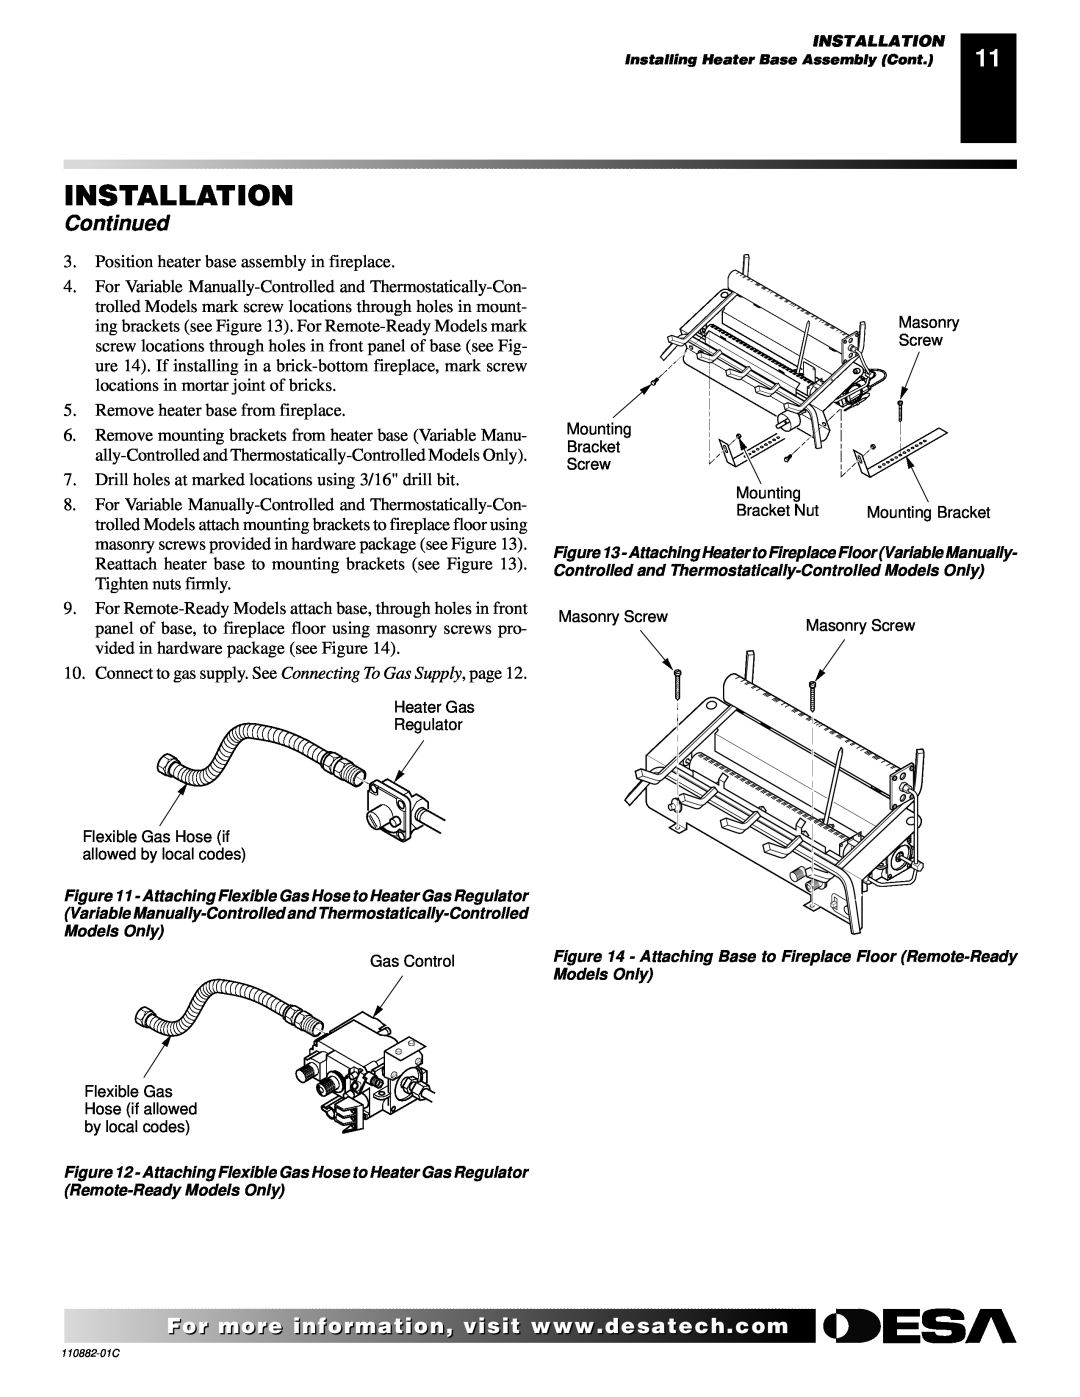 Desa R, V, T, 30 installation manual Installation, Continued, Position heater base assembly in fireplace 